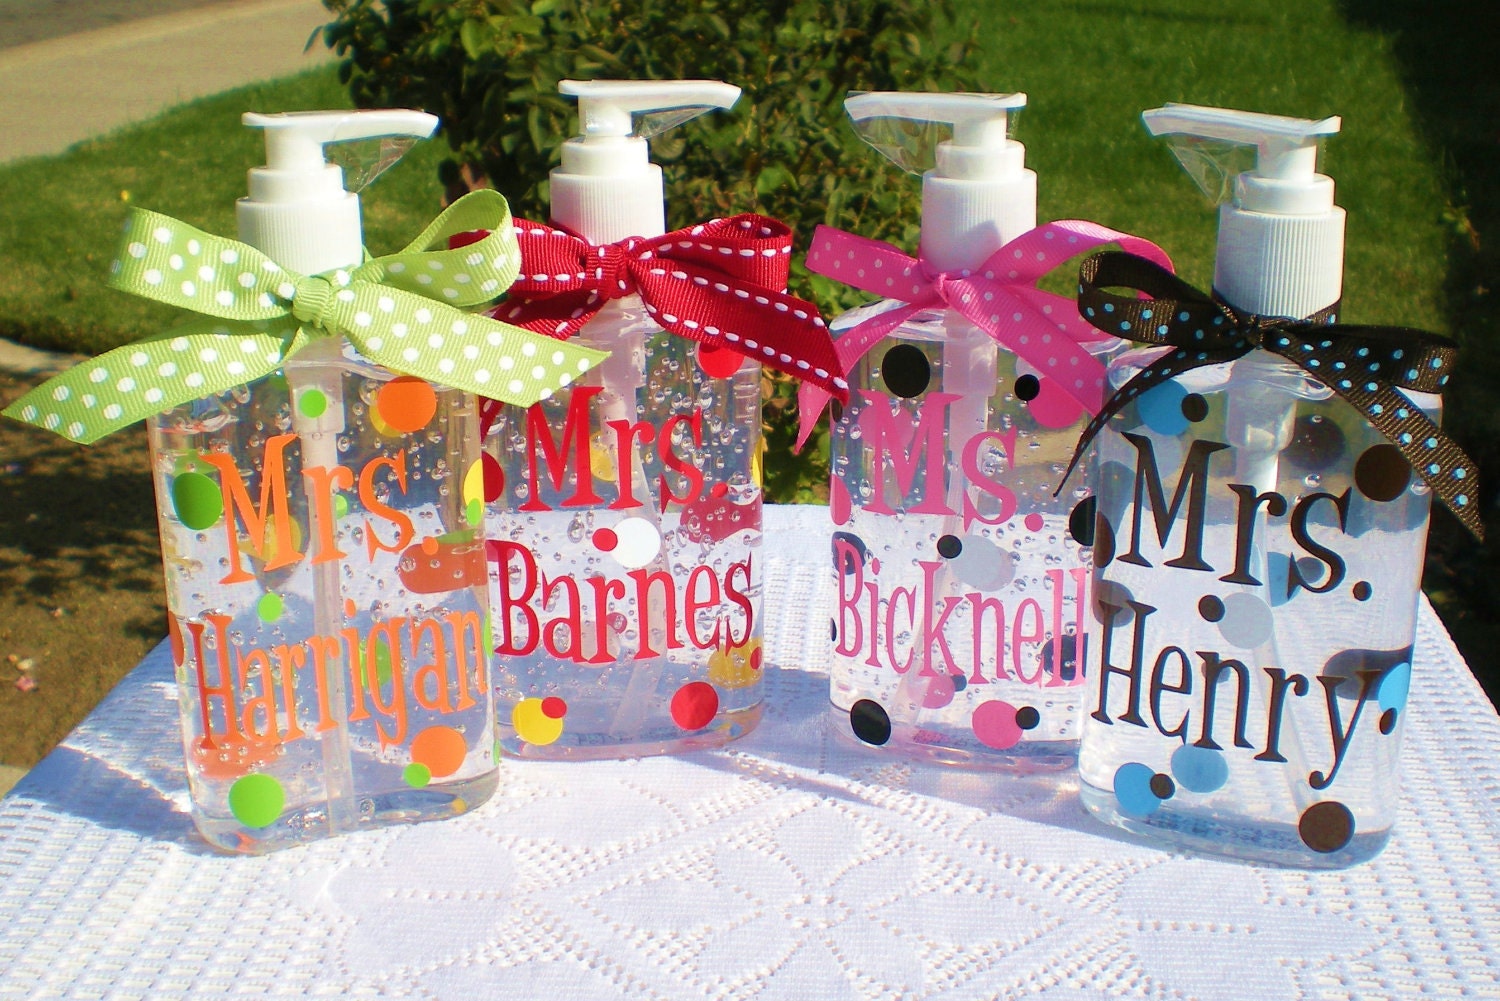 Personalized Hand Sanitizer - 8oz. - Teacher Gift  - Birthday Gift -
 Adults - Teens - Gifts - Stocking Stuffer